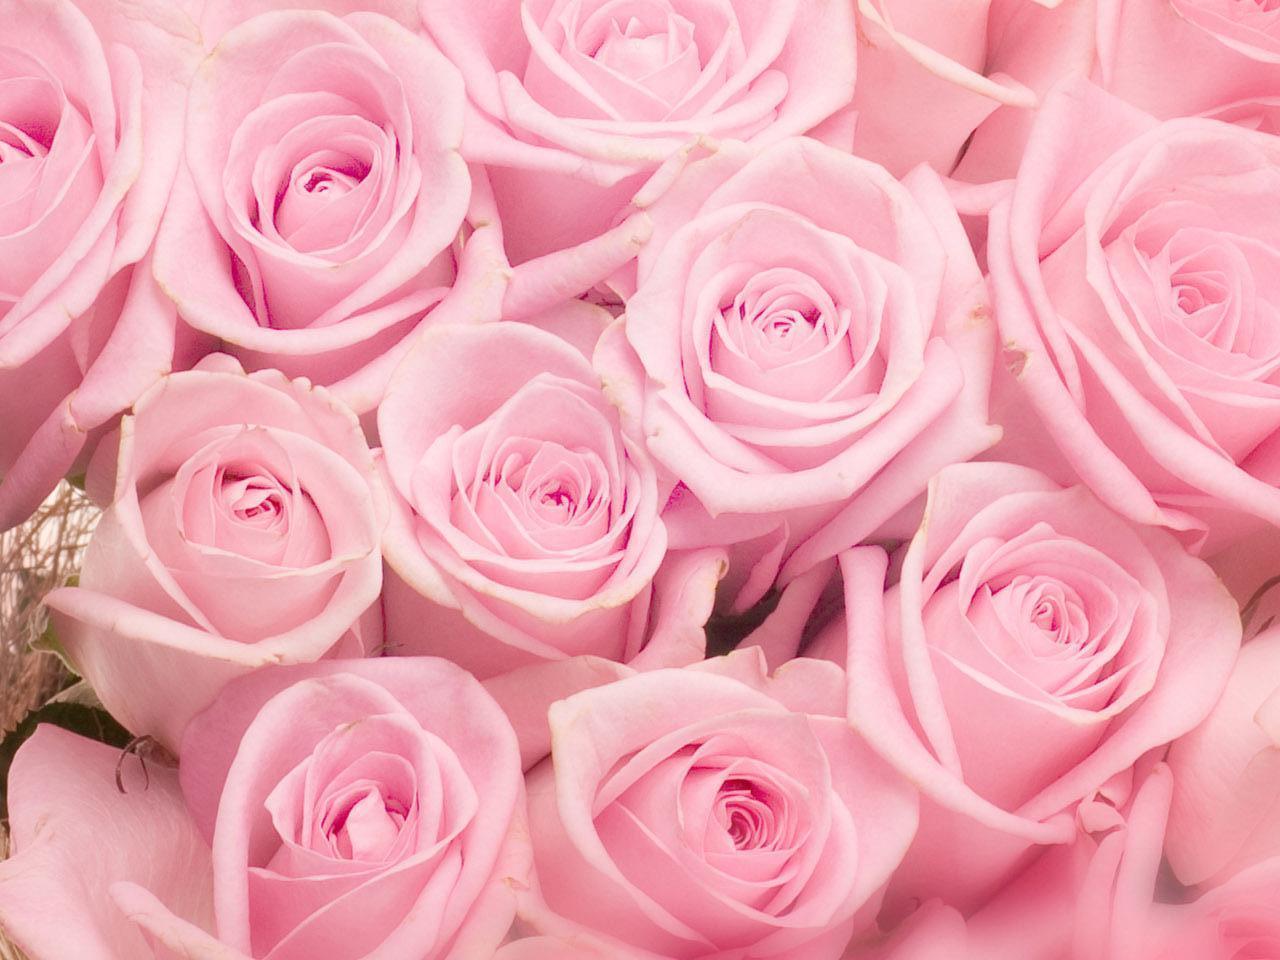 Soft Pink Roses Wallpapers - Top Free Soft Pink Roses Backgrounds ...